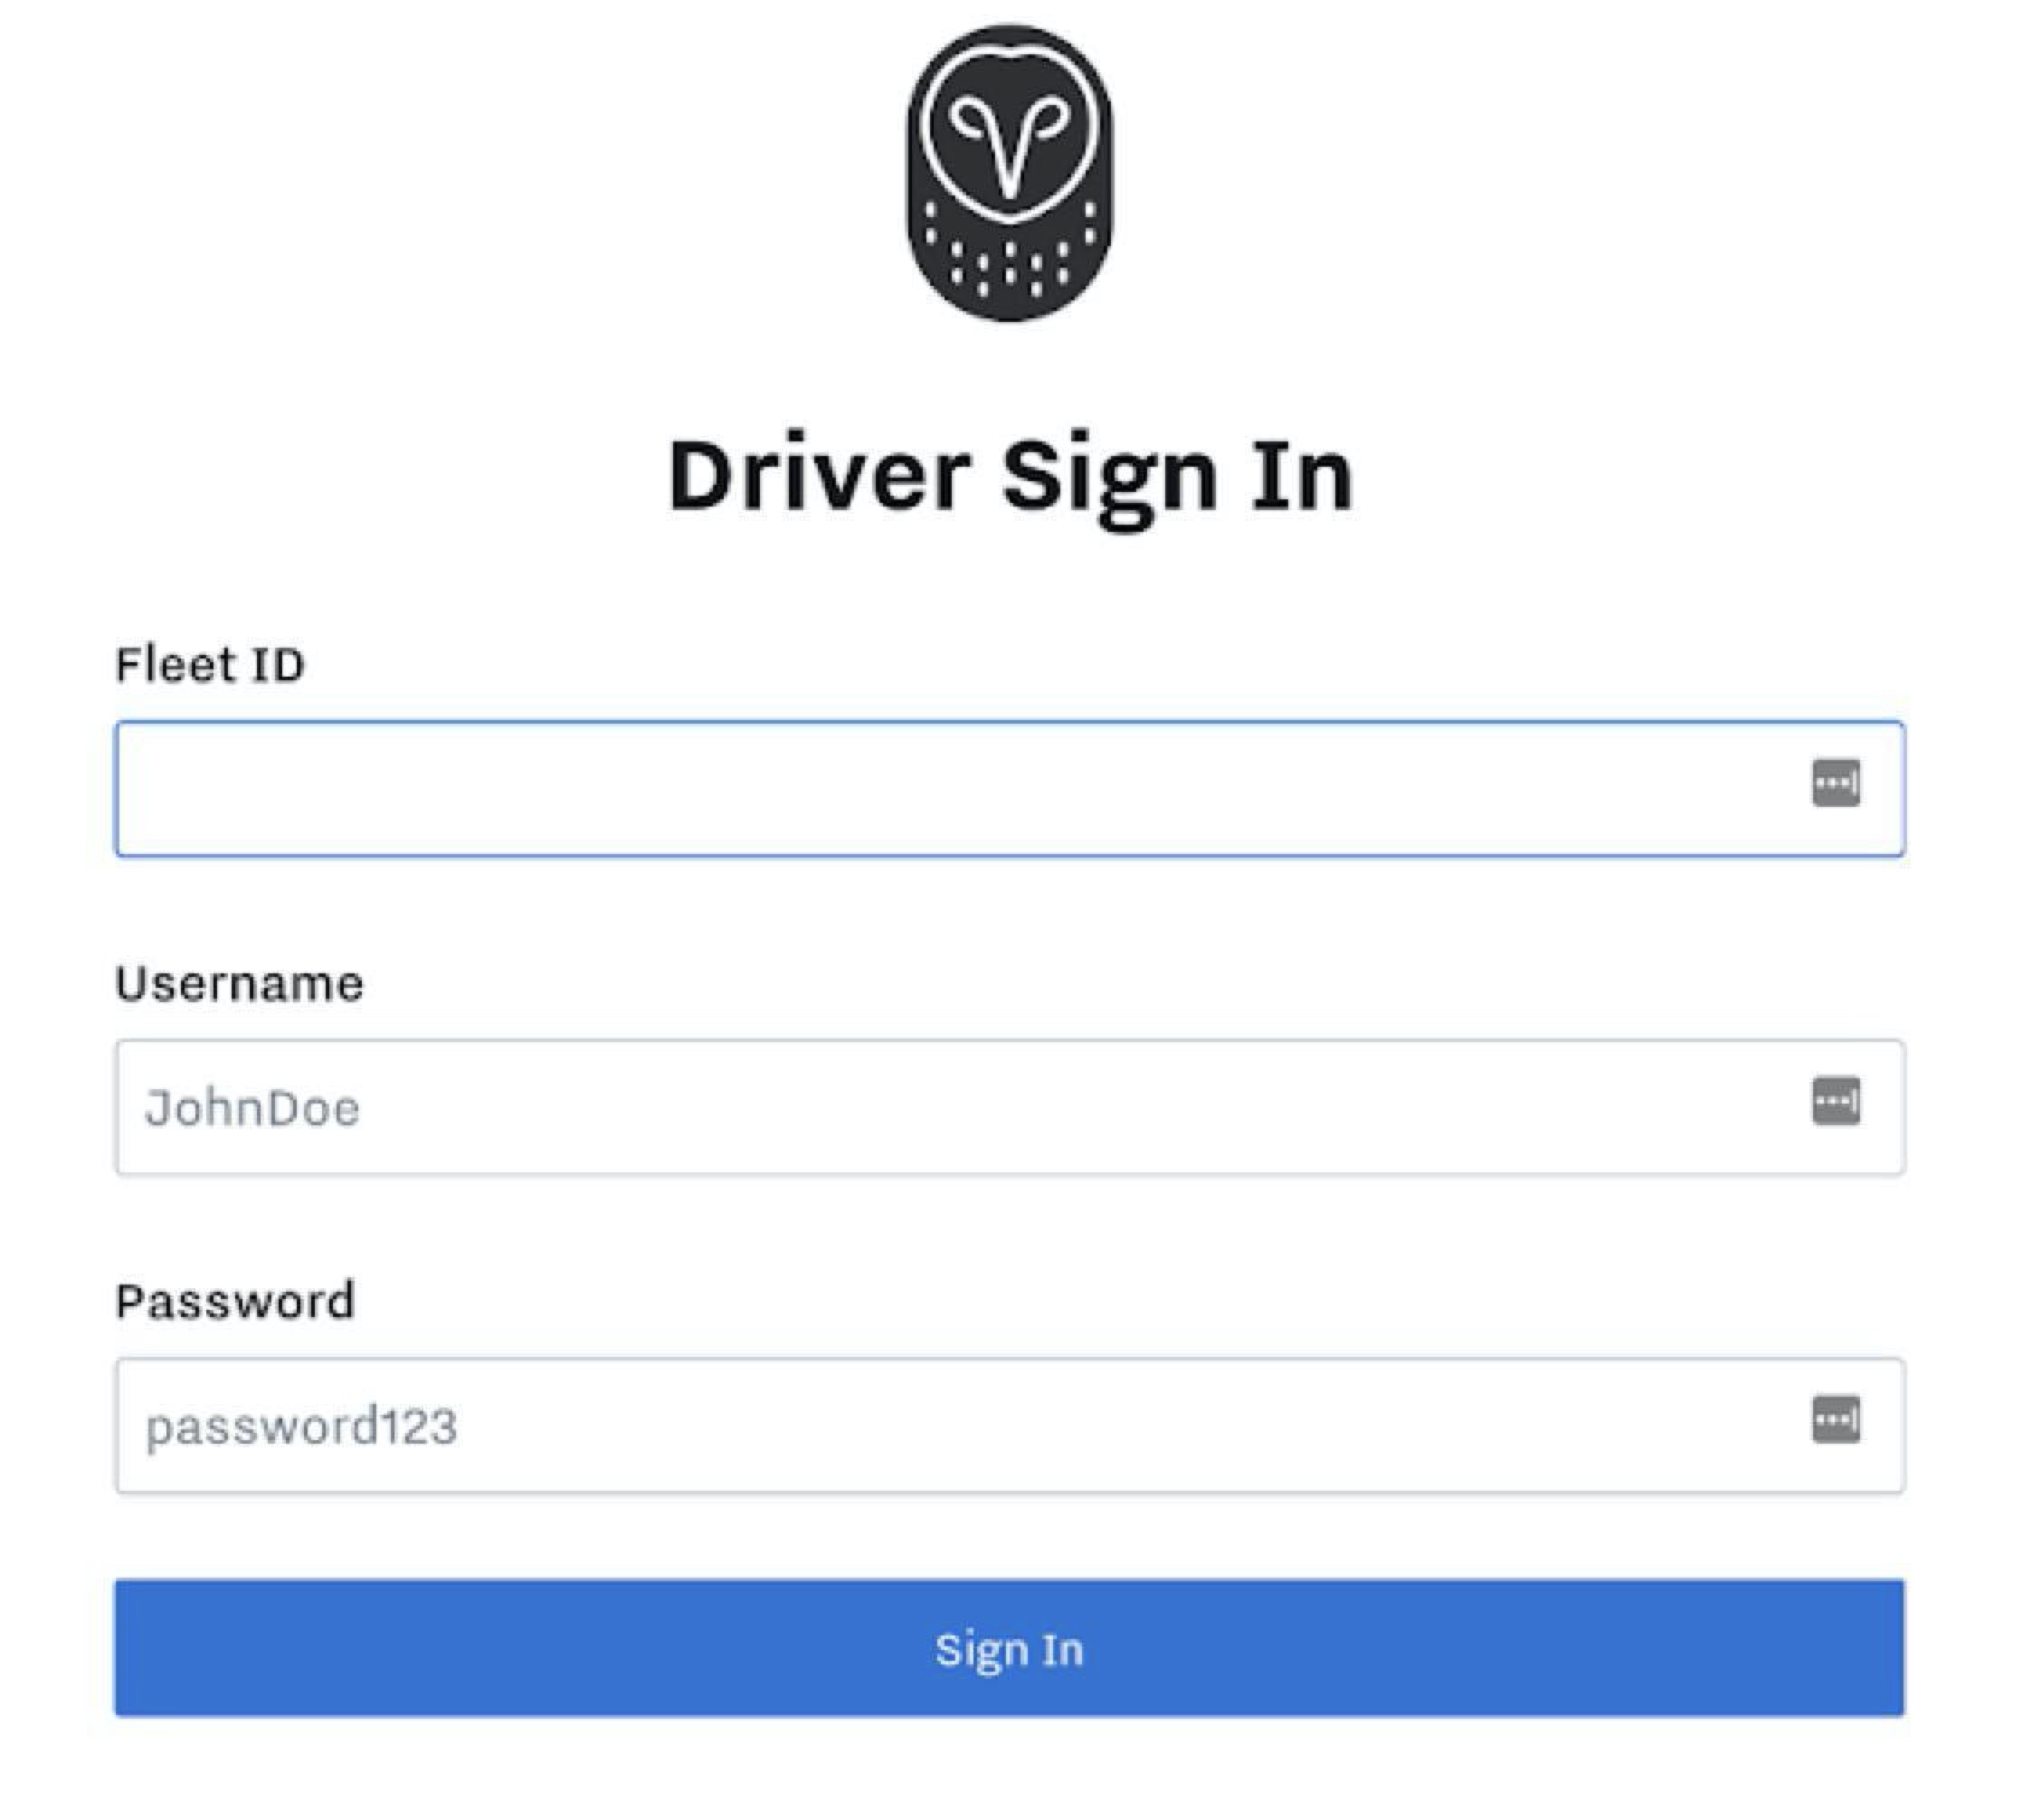 Driver_Sign_In.jpg